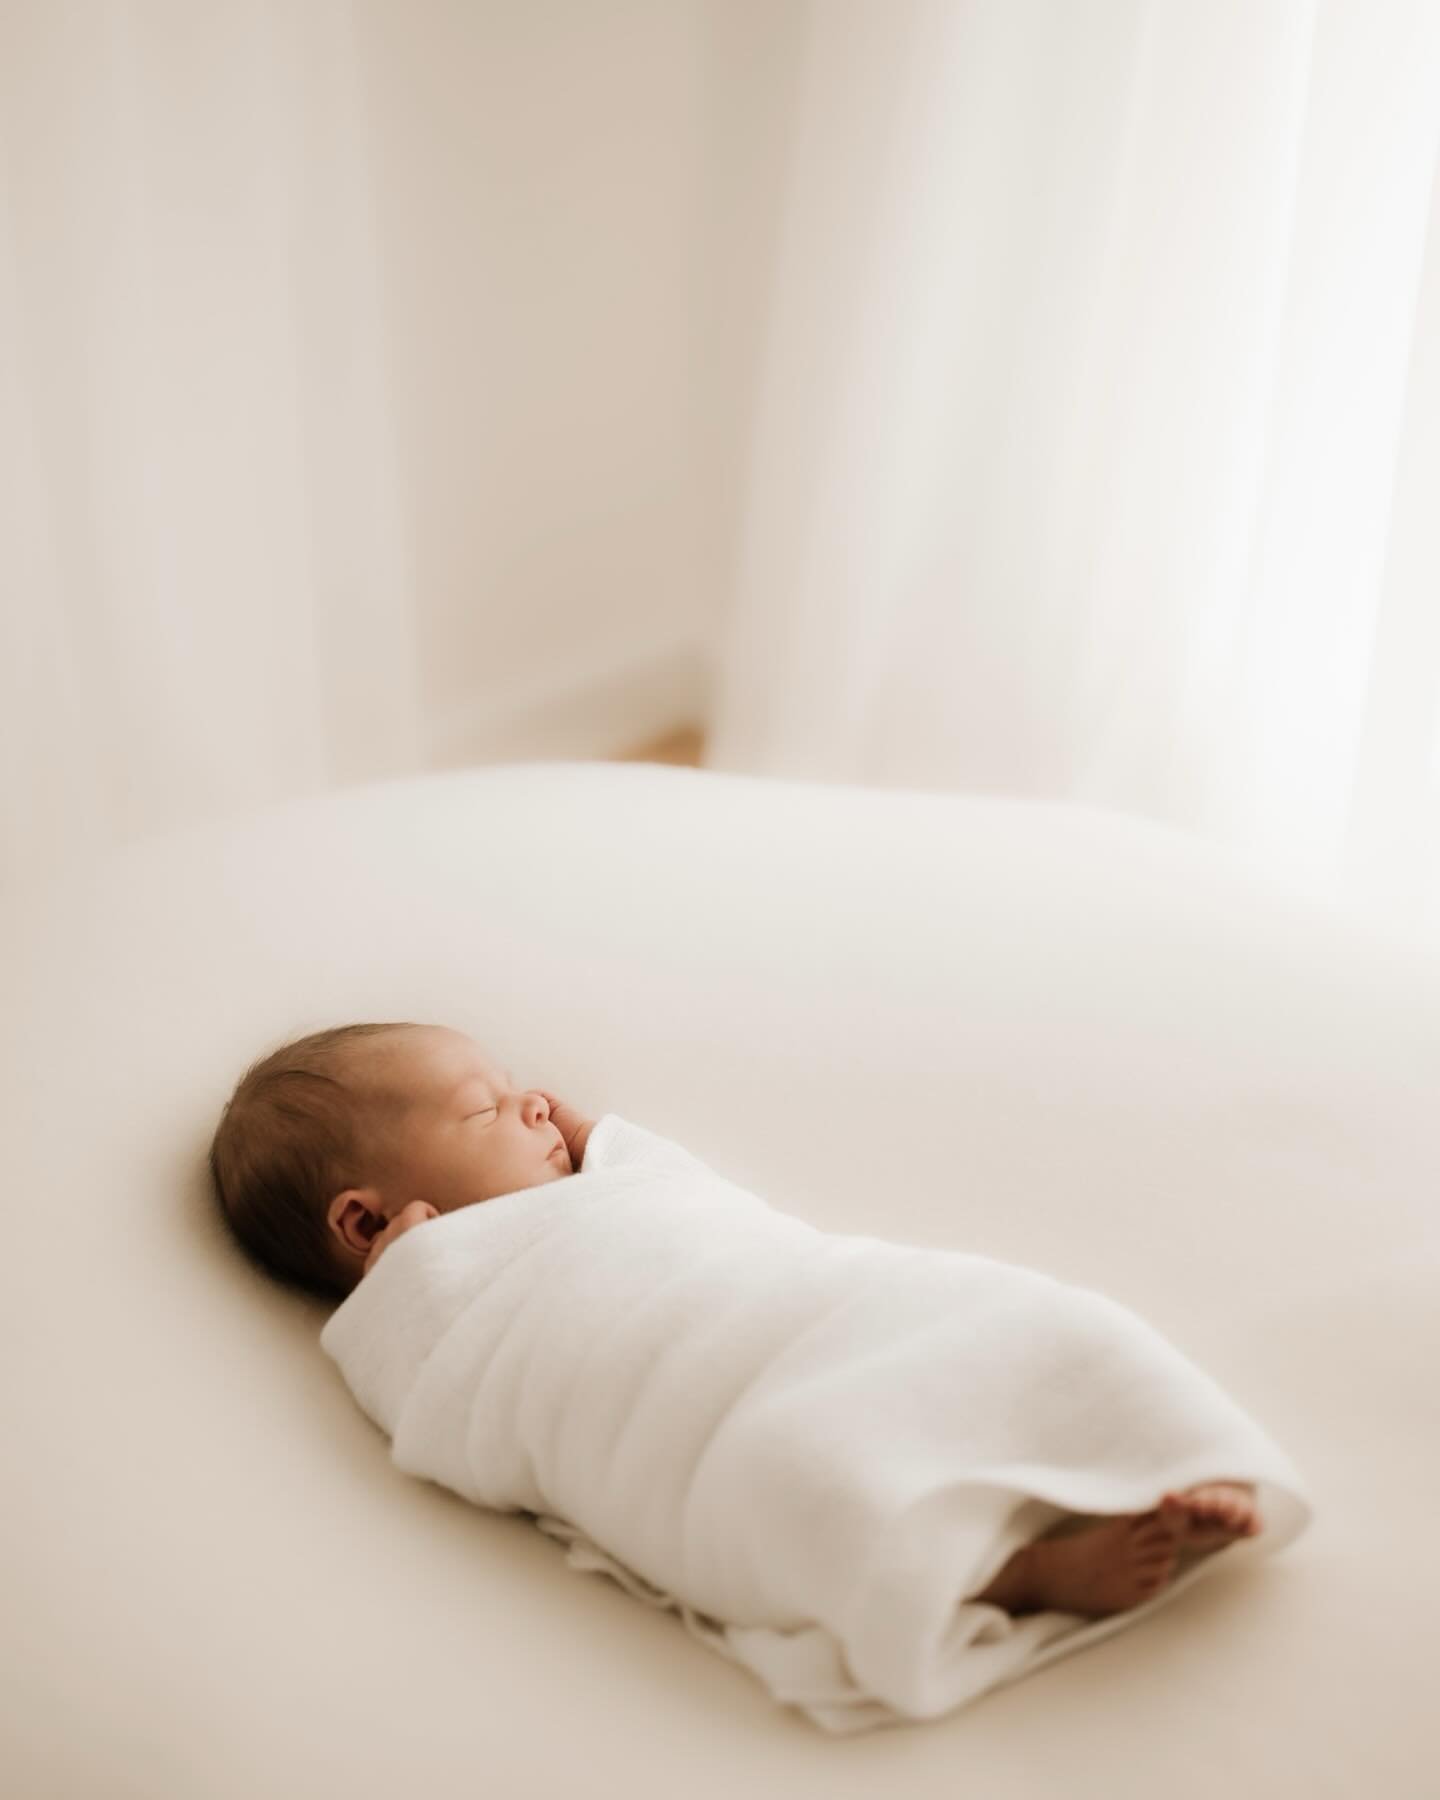 The dreamiest newborn baby girl, Lillian ☁️
In the studio, at 6 days earthside. After arriving 2 weeks early. Gosh I love capturing newborn babies.

Did your babies arrive early, on time or late?!

Ps~ it&rsquo;s the last photo for me 🥹

#jessverhey